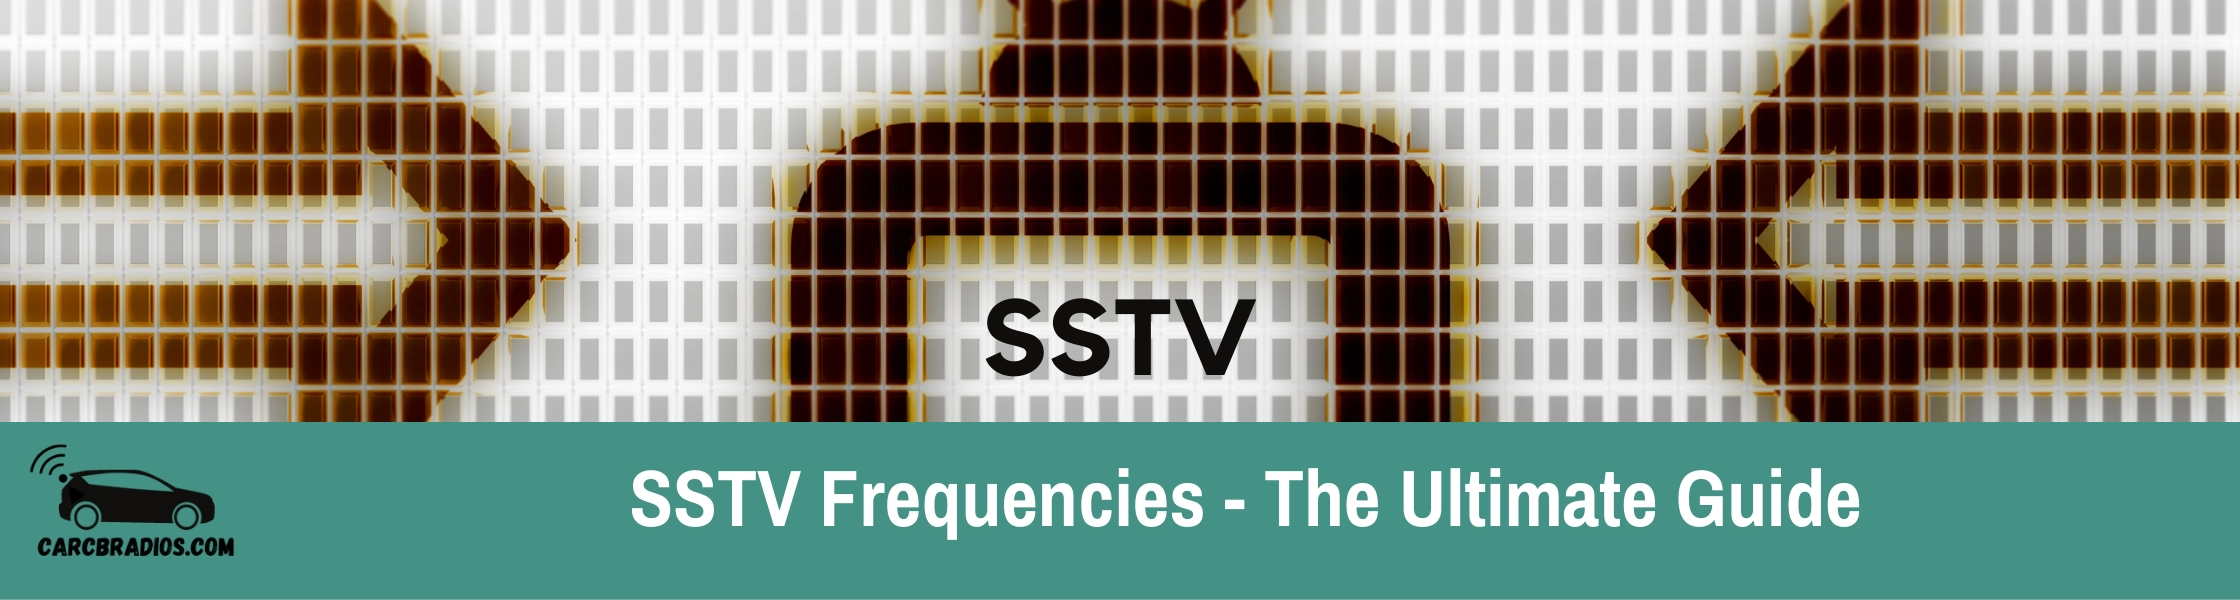 SSTV Frequencies - The Ultimate Guide: Slow Scan TV, or SSTV, is a term used to describe the transmission of pictures by radio. It's comparable to early television systems or fax machines. In as few words as possible, this technique uses sound to generate and exhibit an image sent by another source.